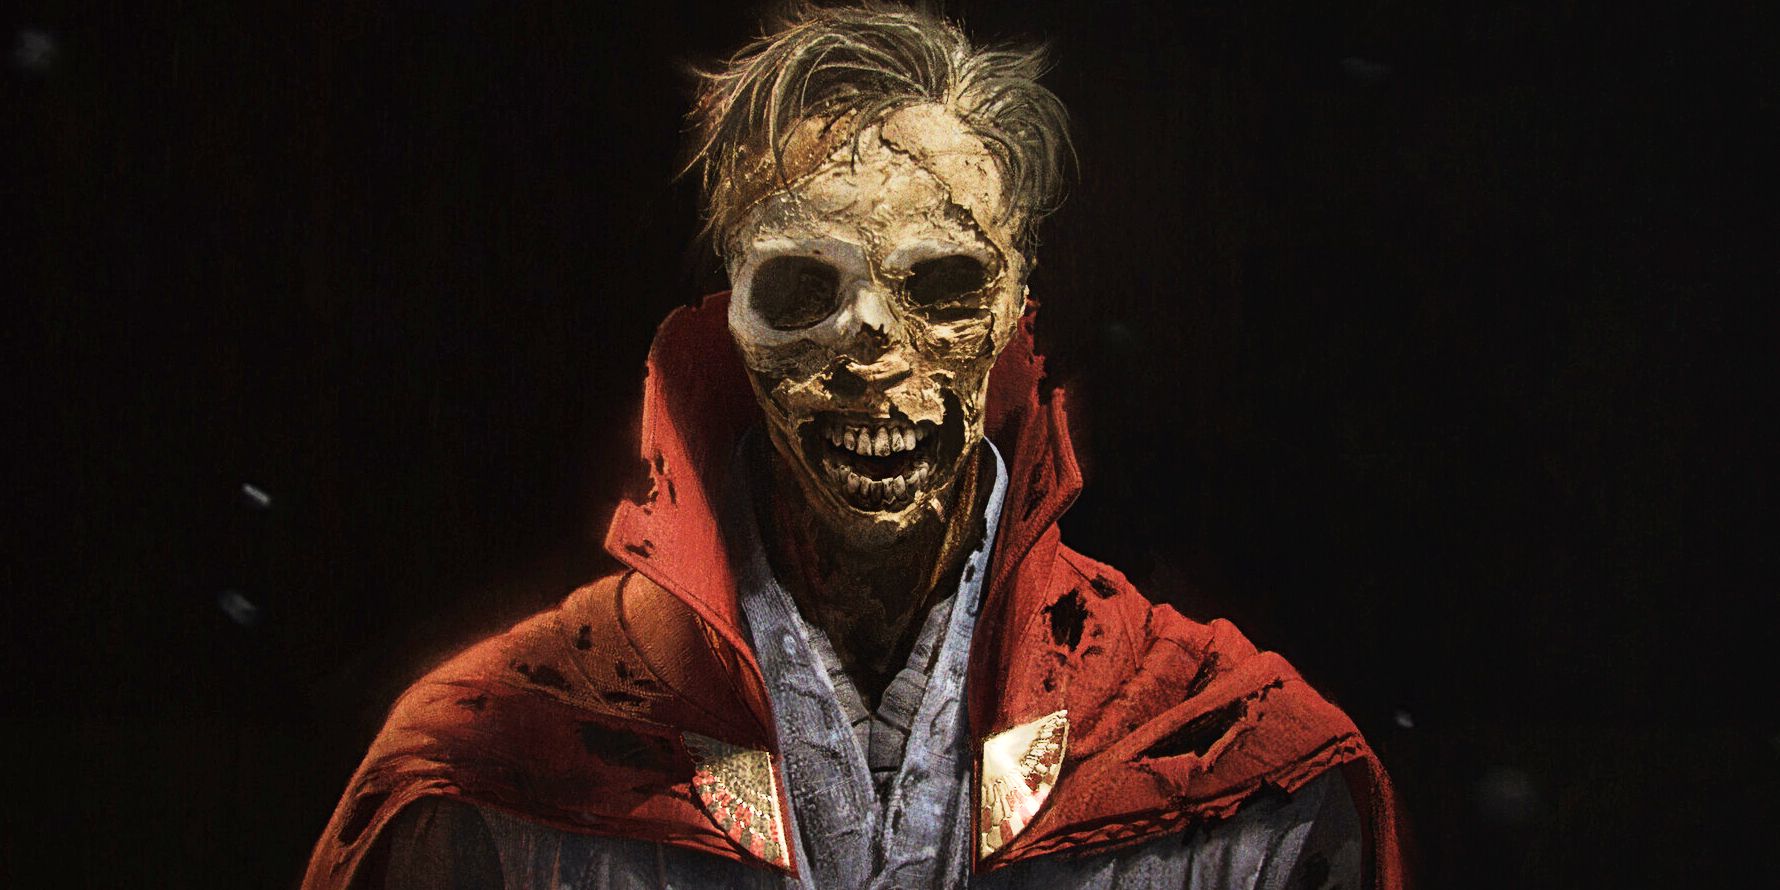 Zombie Strange concept art from Doctor Strange in the Multiverse of Madness